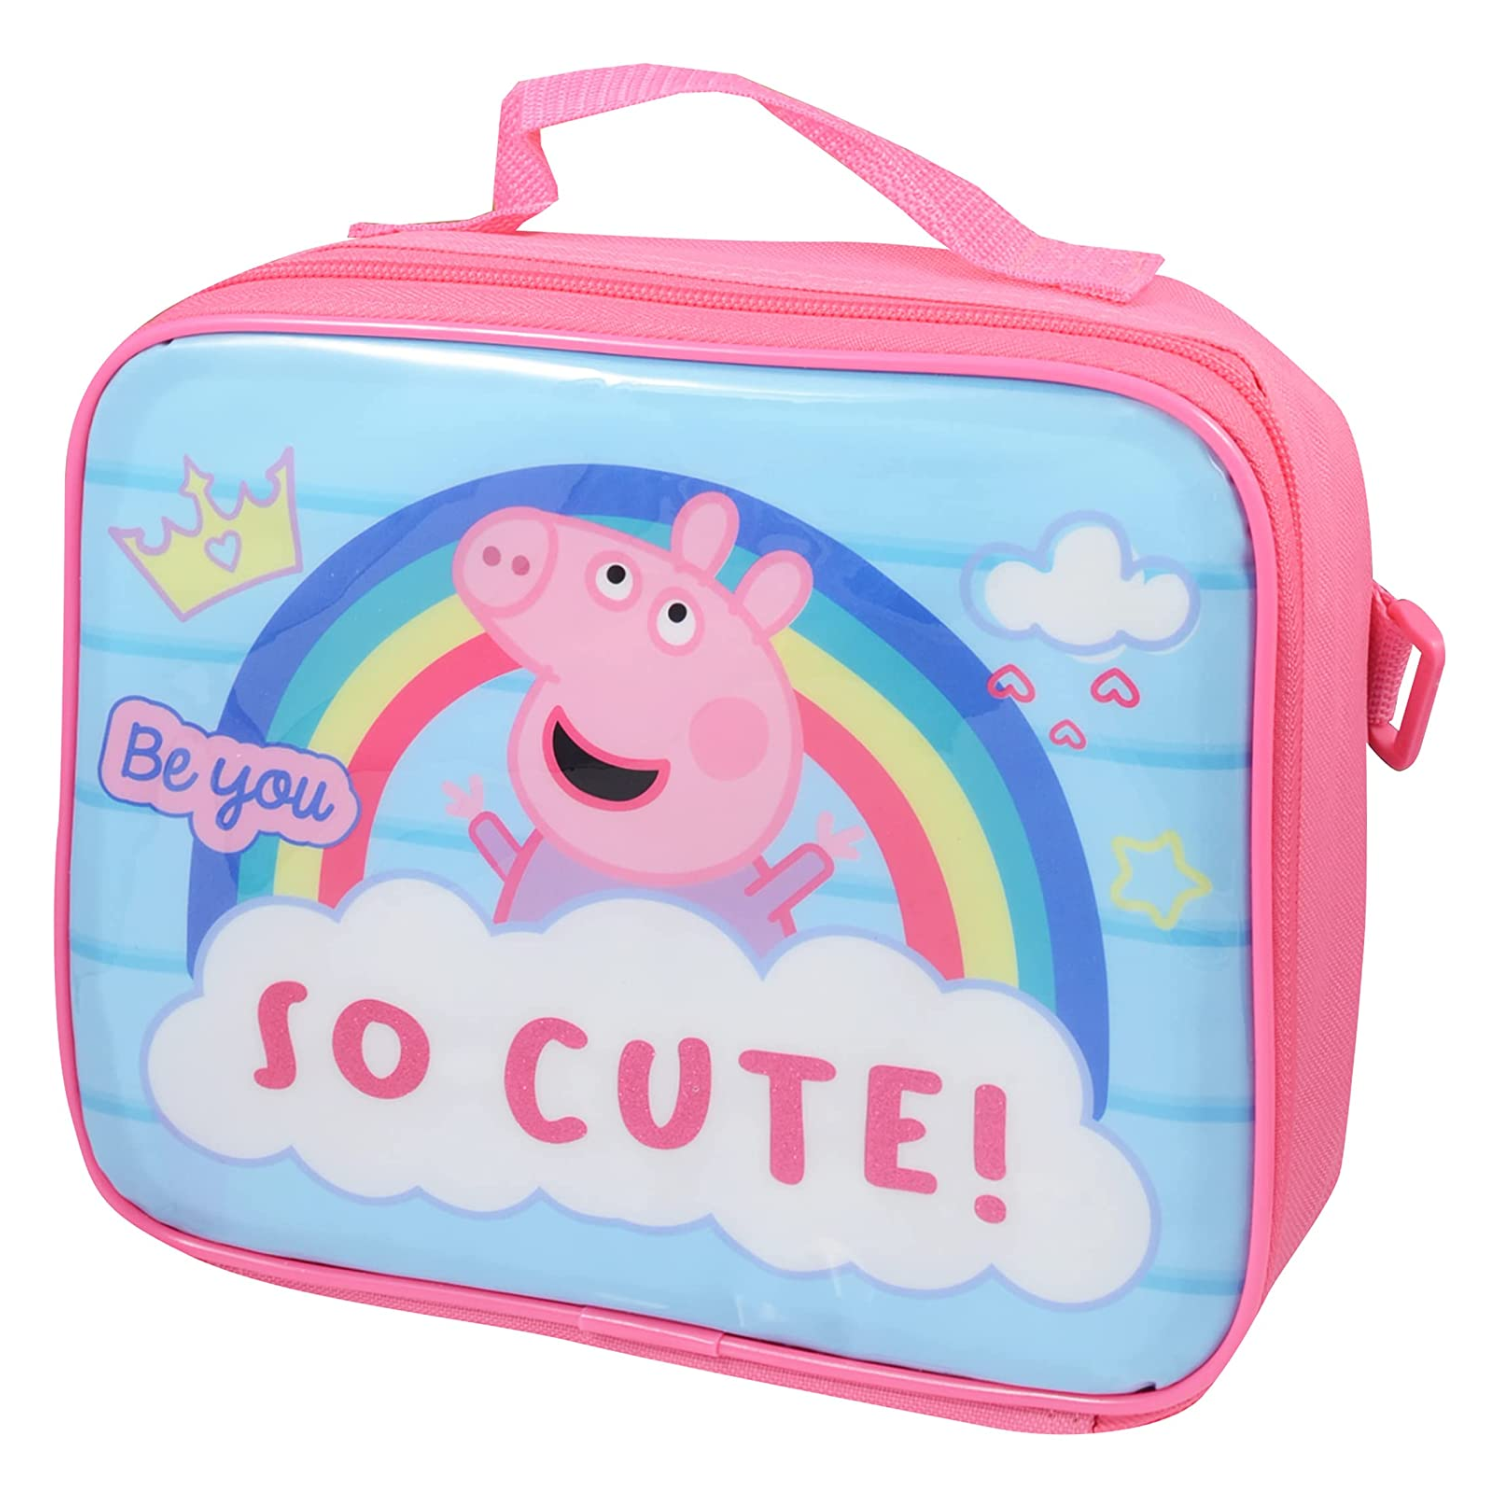 https://backpacks.global/compare/wp-content/uploads/Peppa-Pig-Backpack-Lunch-Box-Set-Front-Lunch-Box-View.png